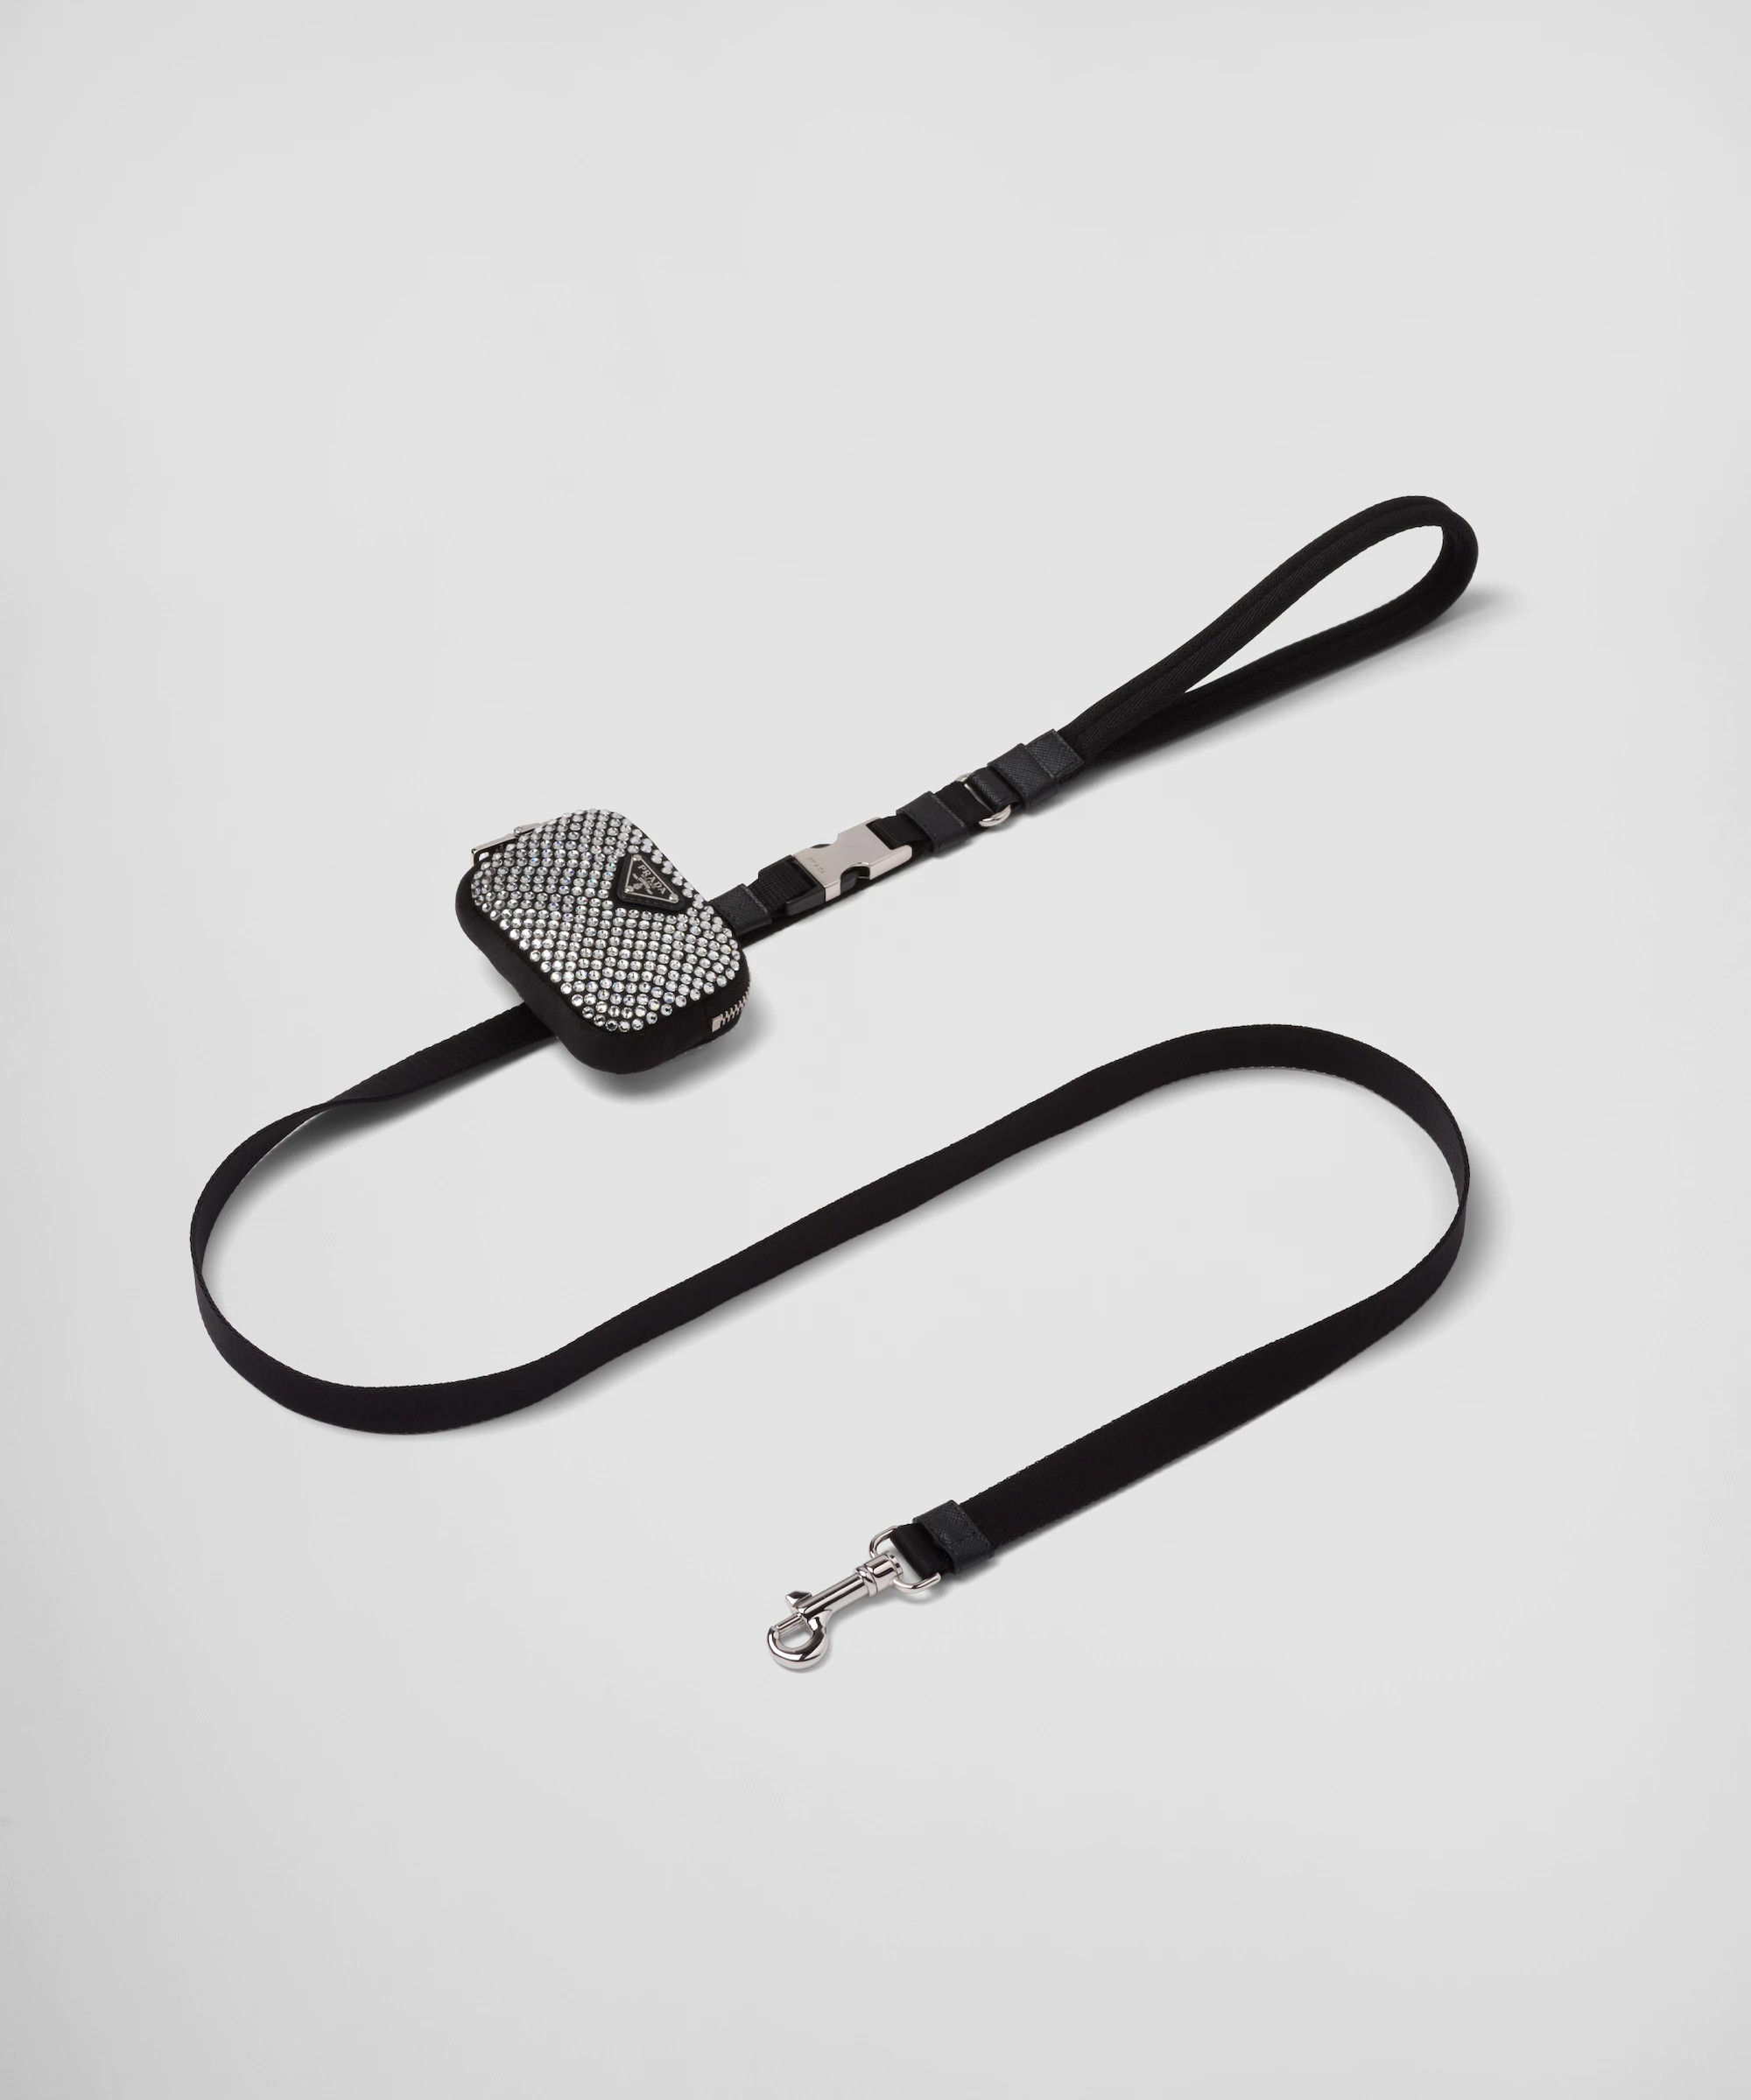 Black Prada pet leash with silver-tone hardware and a jewel-encrusted poop bag attached.